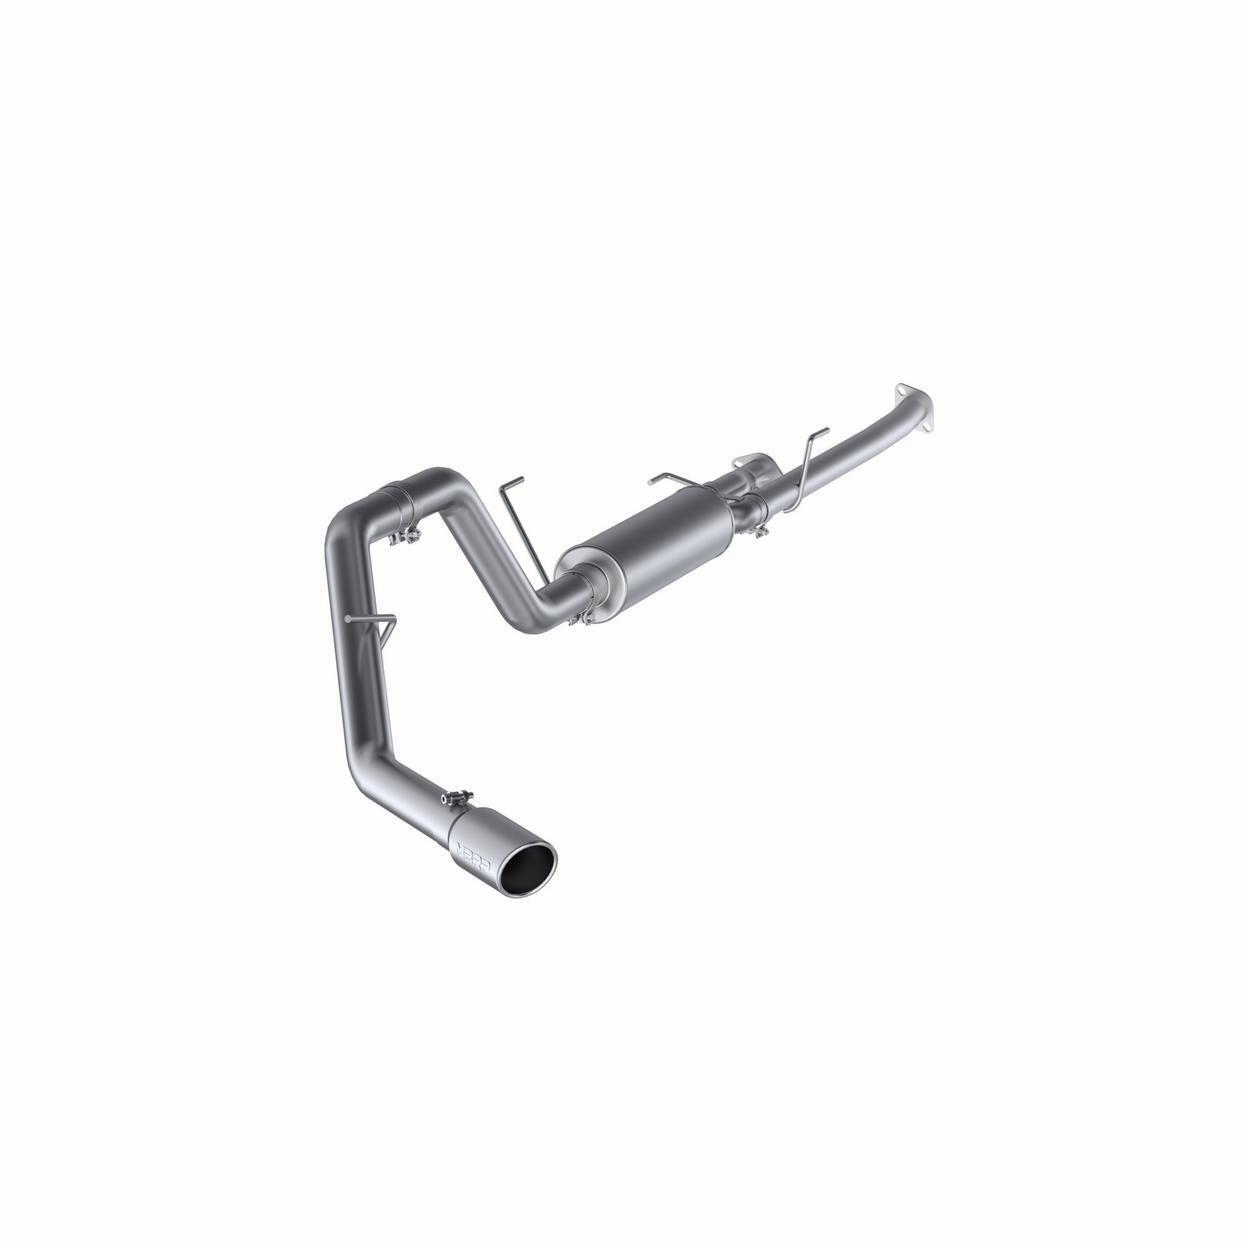 MBRP Exhaust S5314AL-GV Exhaust System Kit for 2013-2016 Toyota Tundra